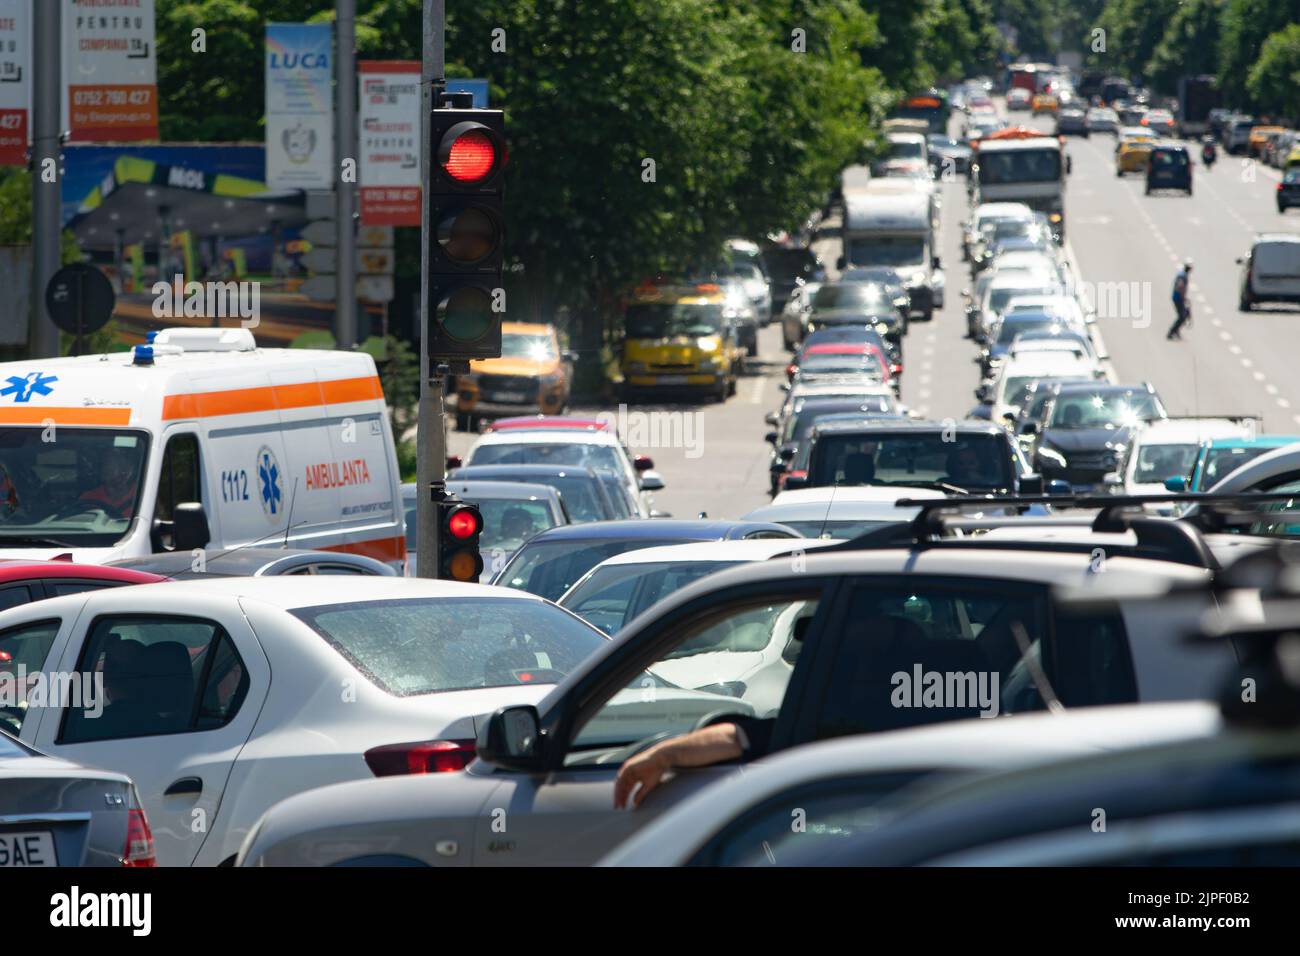 Bucharest, Romania - May 20, 2022: Cars stuck in traffic at red light at rush hour on a boulevard in Bucharest. Stock Photo